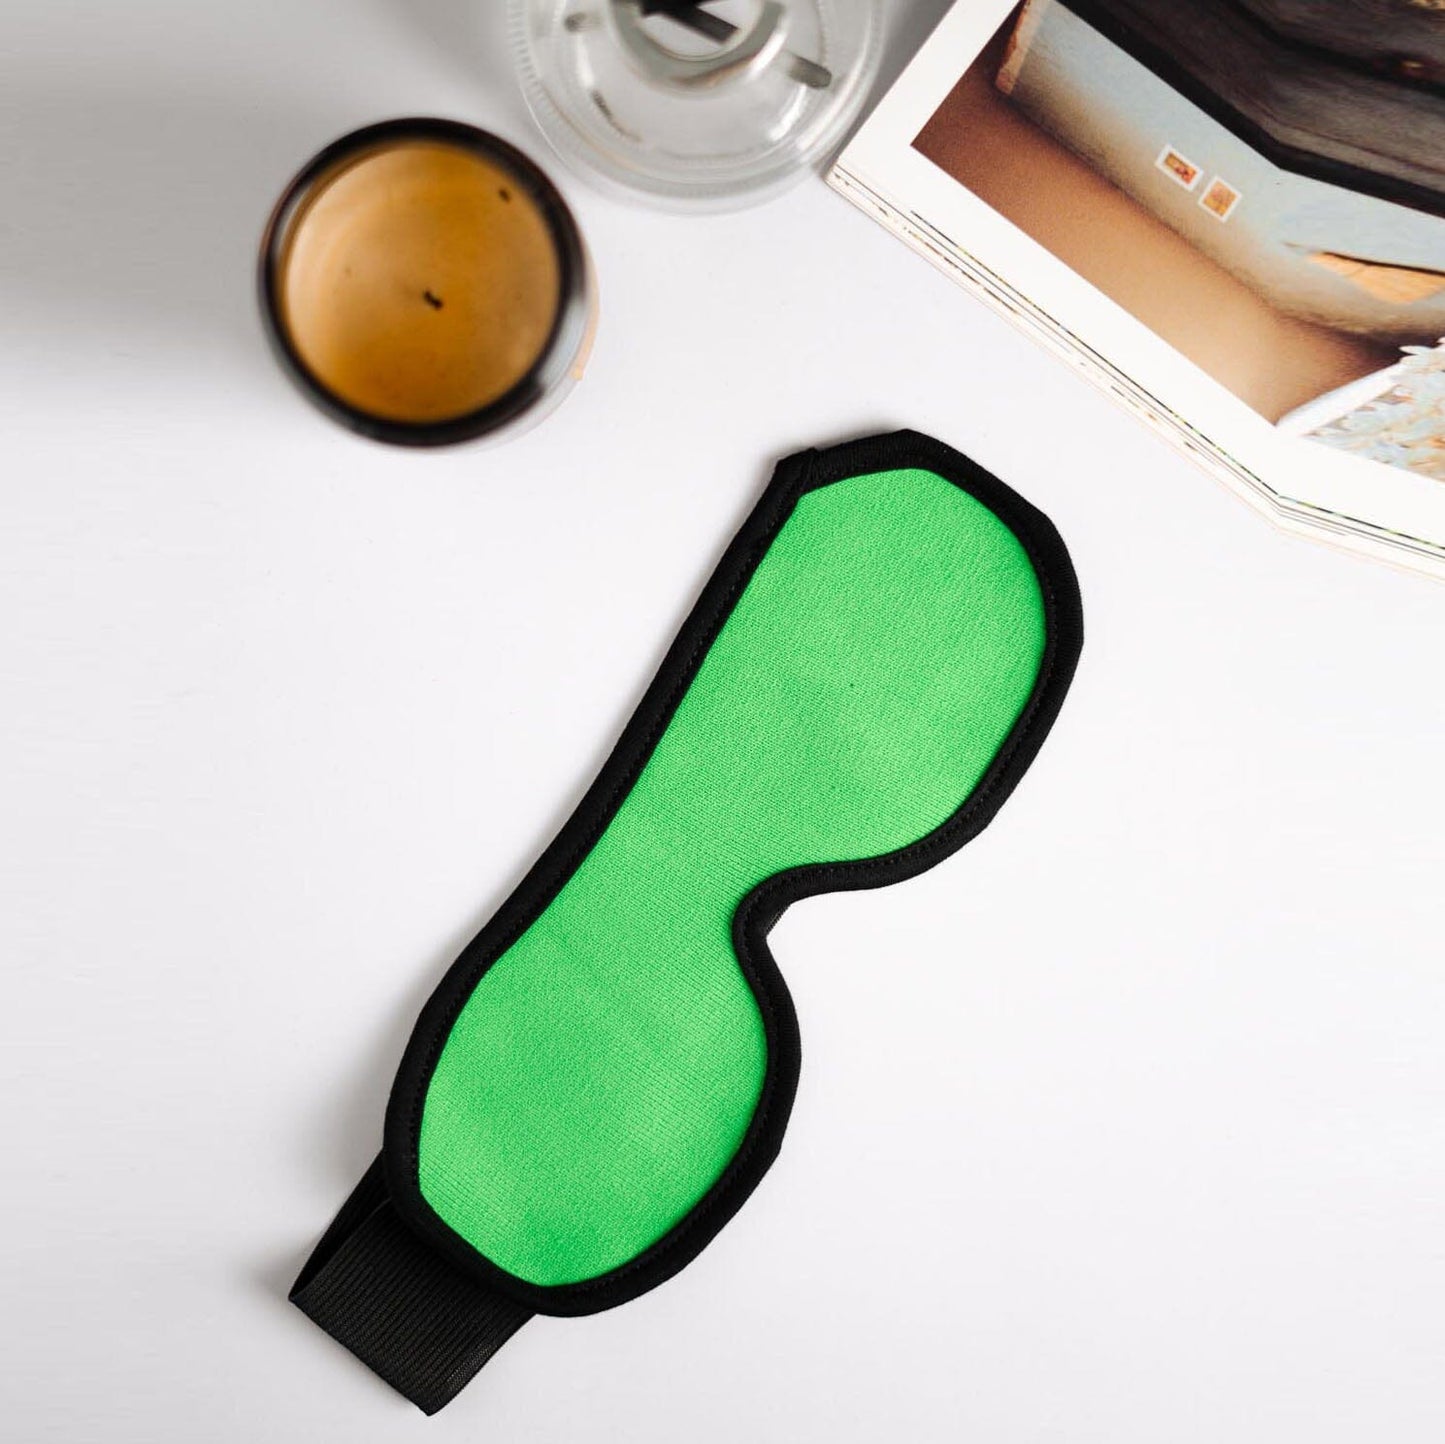 Polo Republica Alesund Solid Eye Mask for Sleeping. Made-With-Waste! Eyewear Polo Republica Lime 